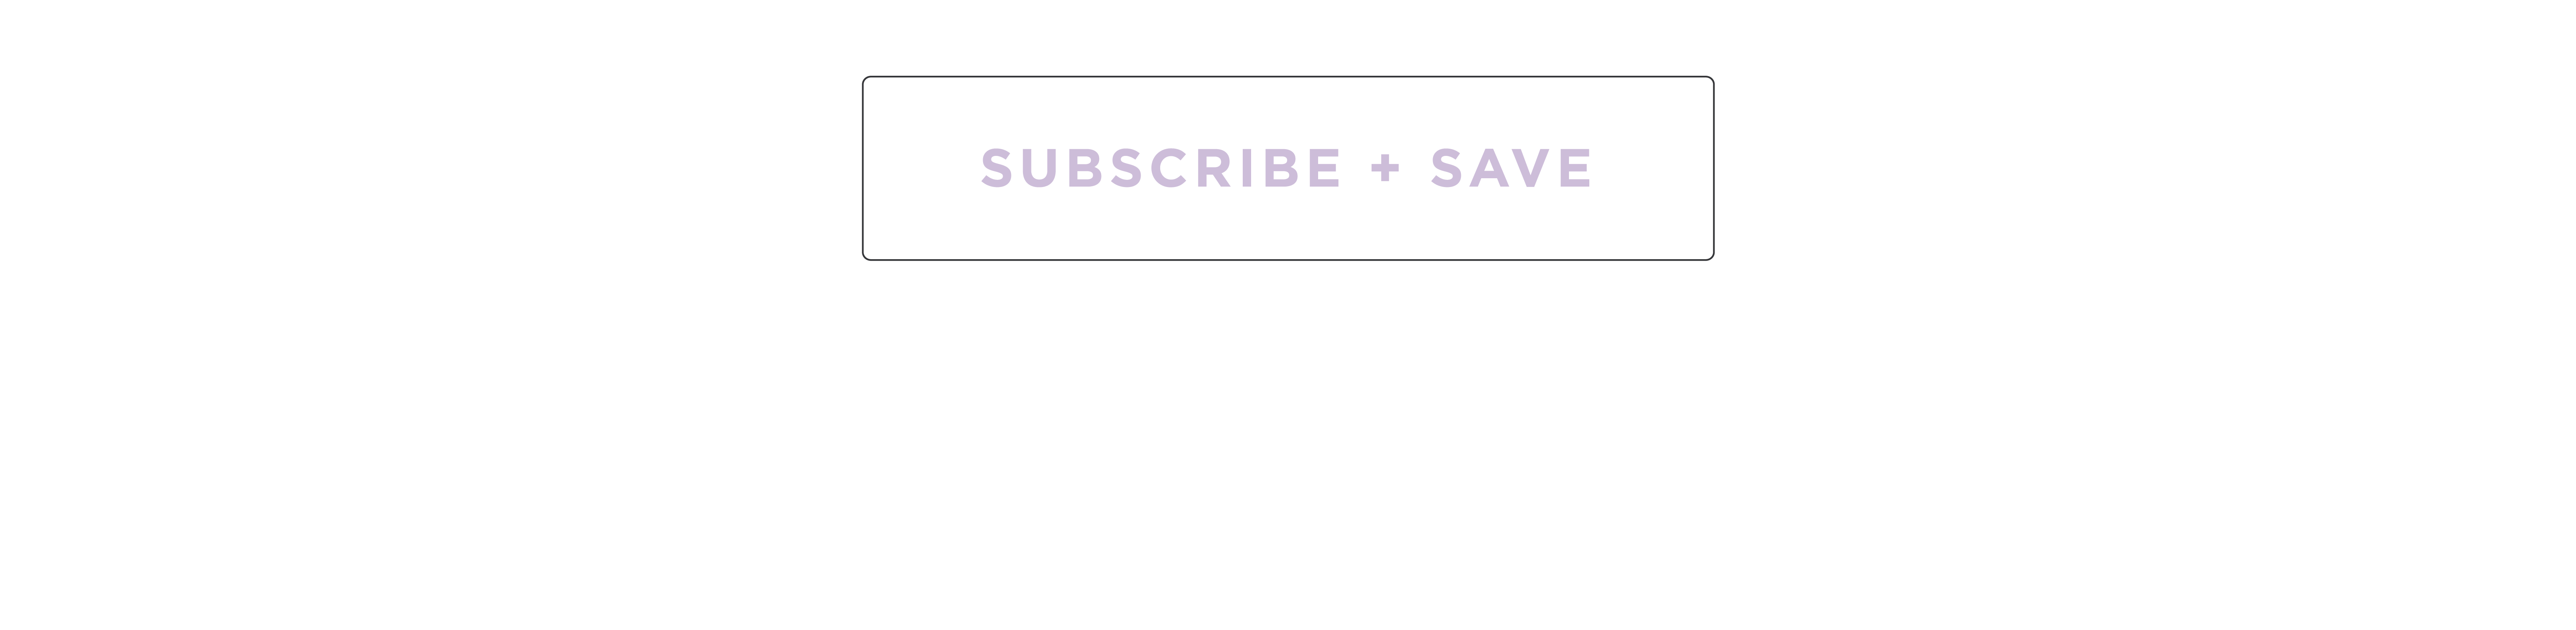 click here to subscribe + save 